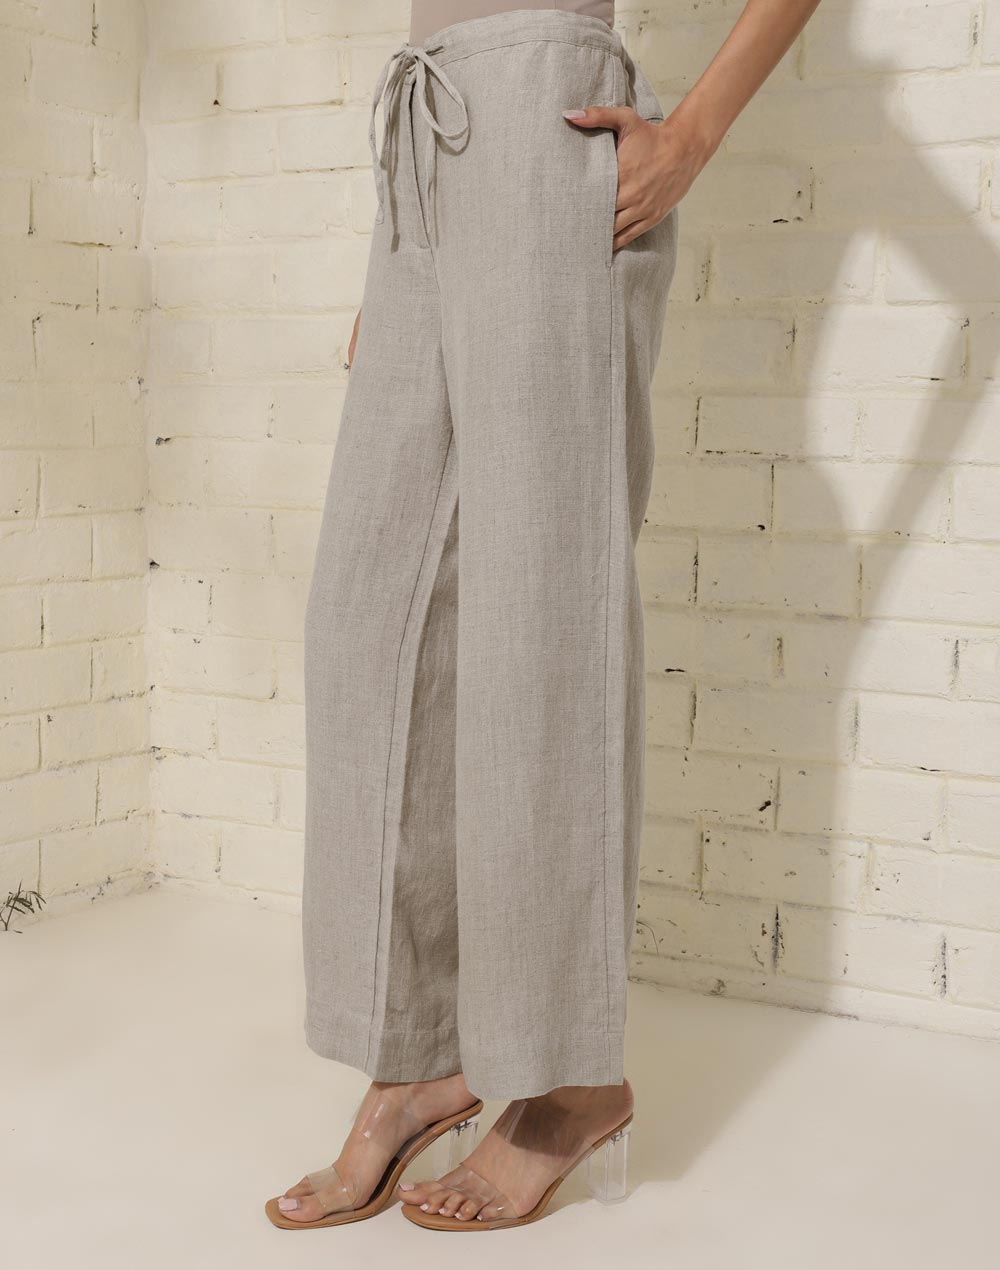 Women Formal Trousers - Buy Culottes for Ladies & Girls Online in India -  FabAlley